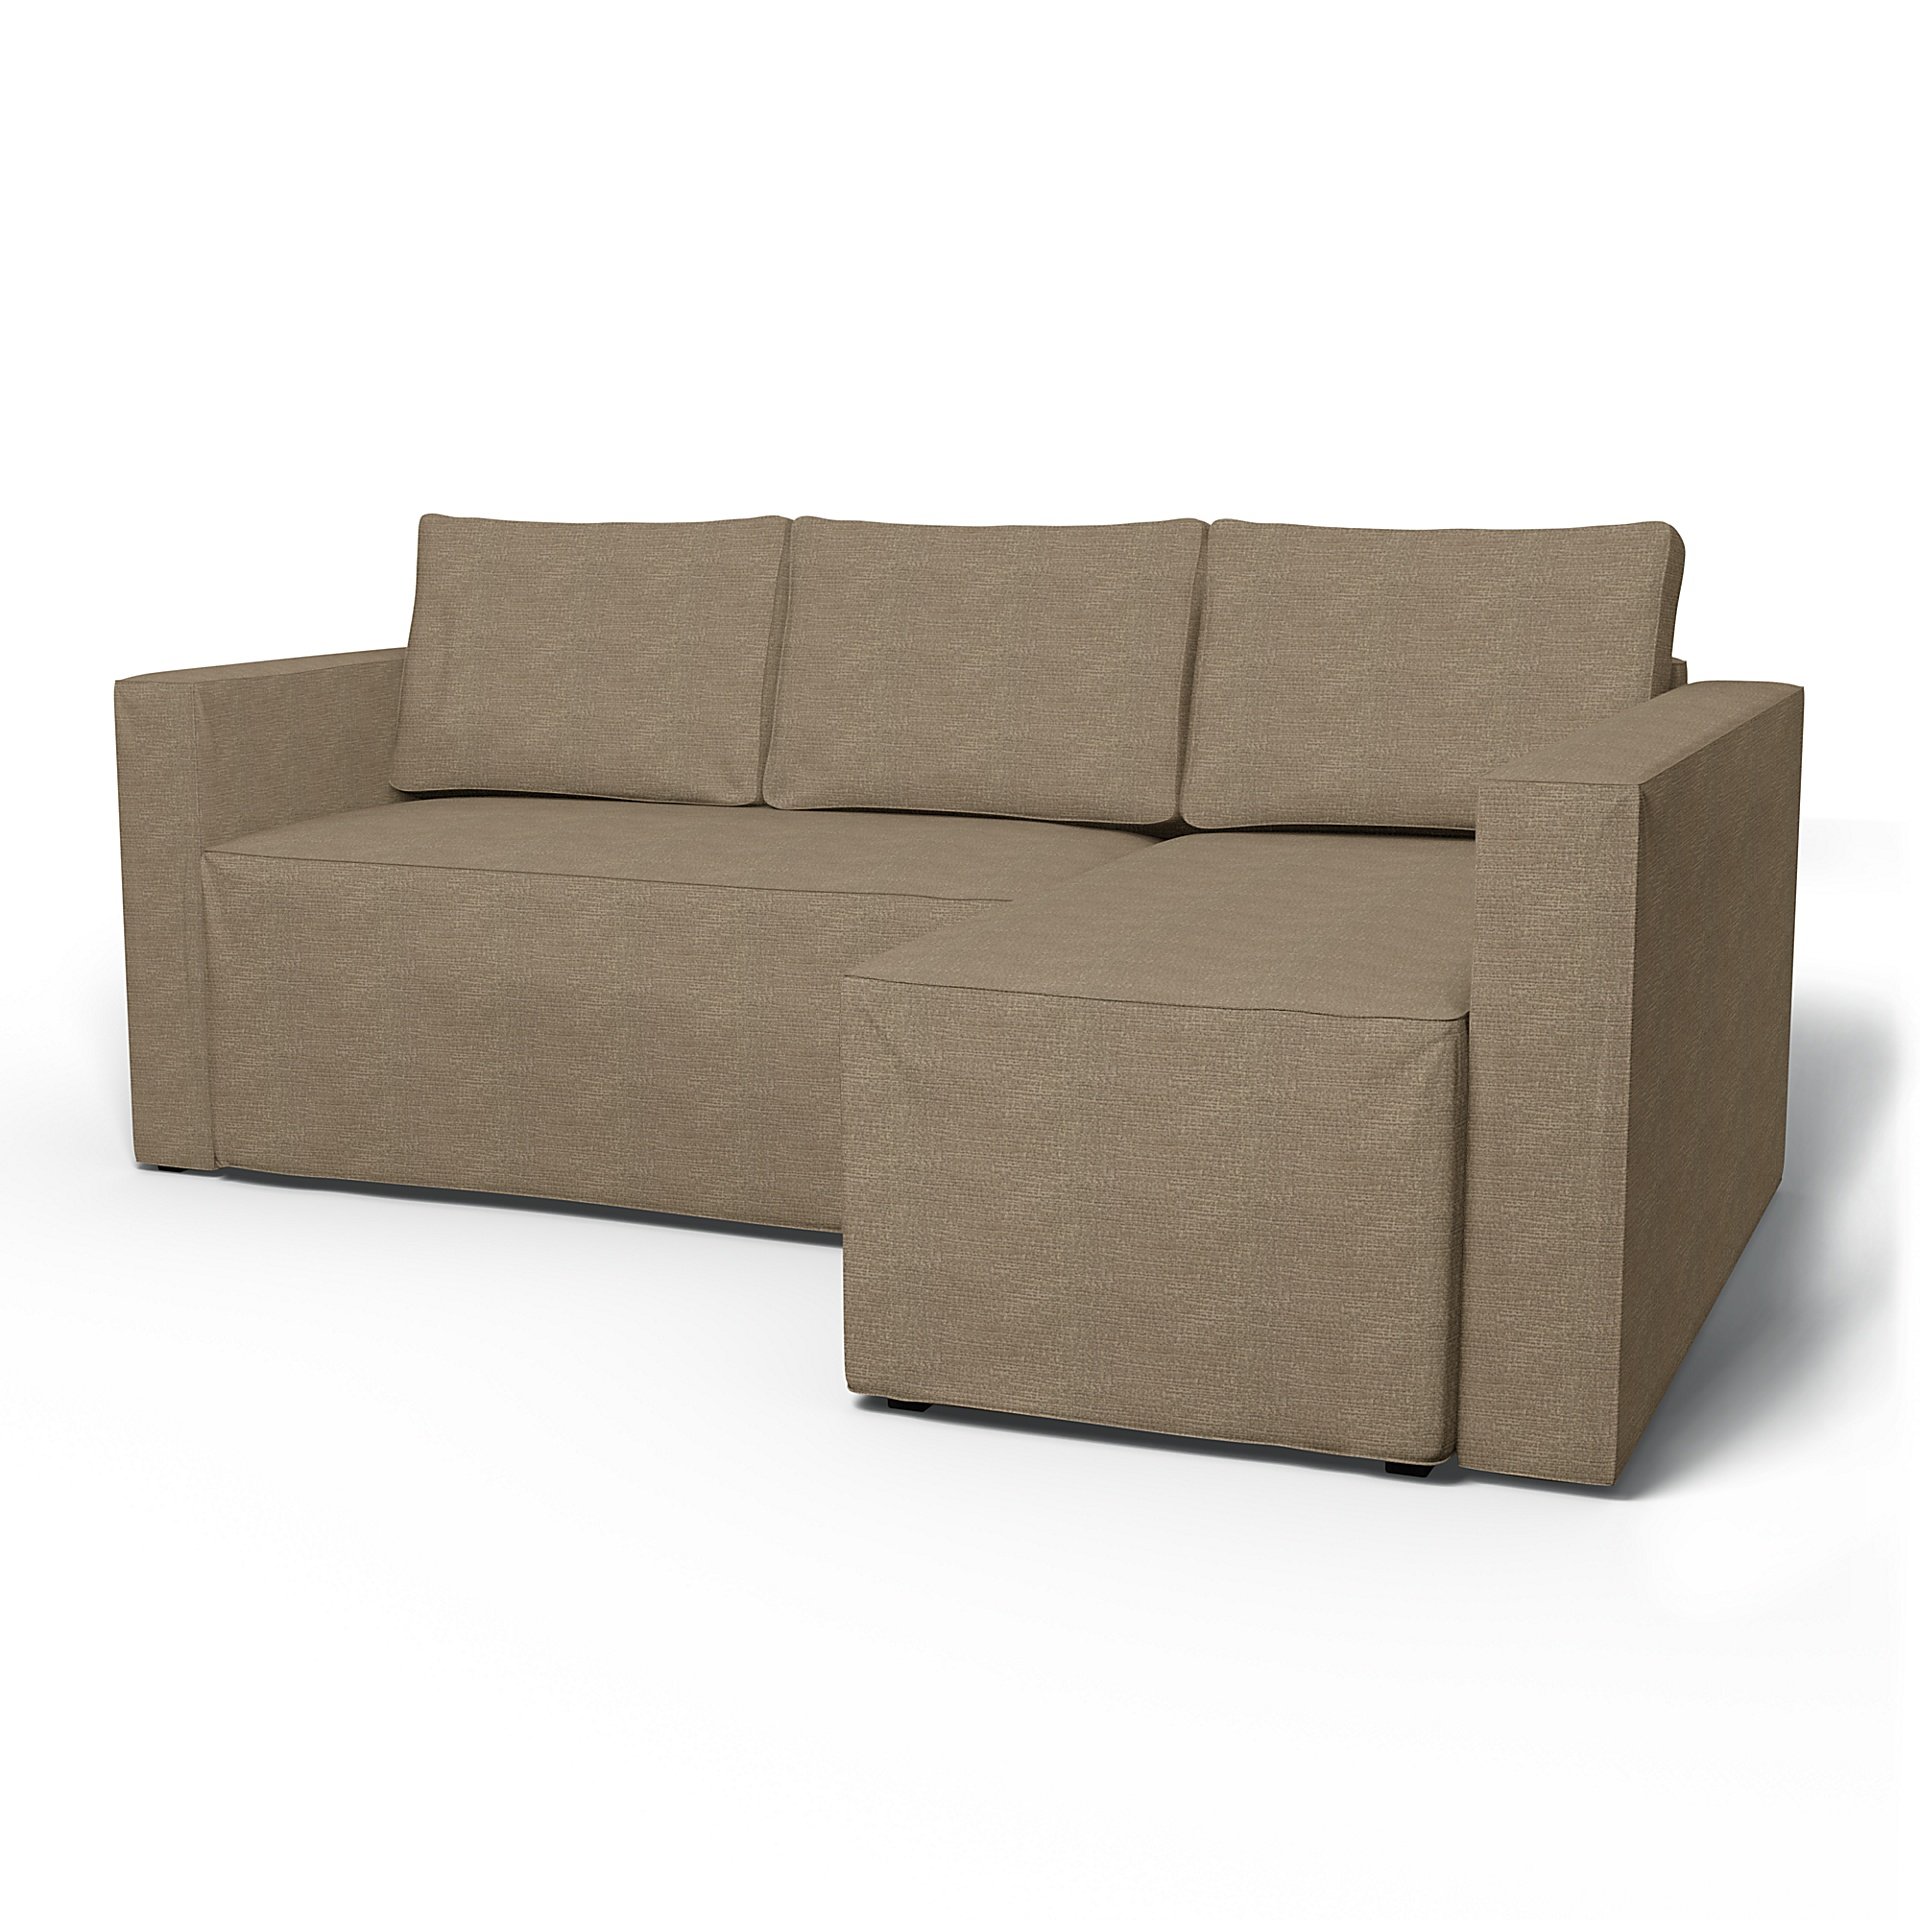 IKEA - Manstad Sofa Bed with Right Chaise Cover, Camel, Boucle & Texture - Bemz